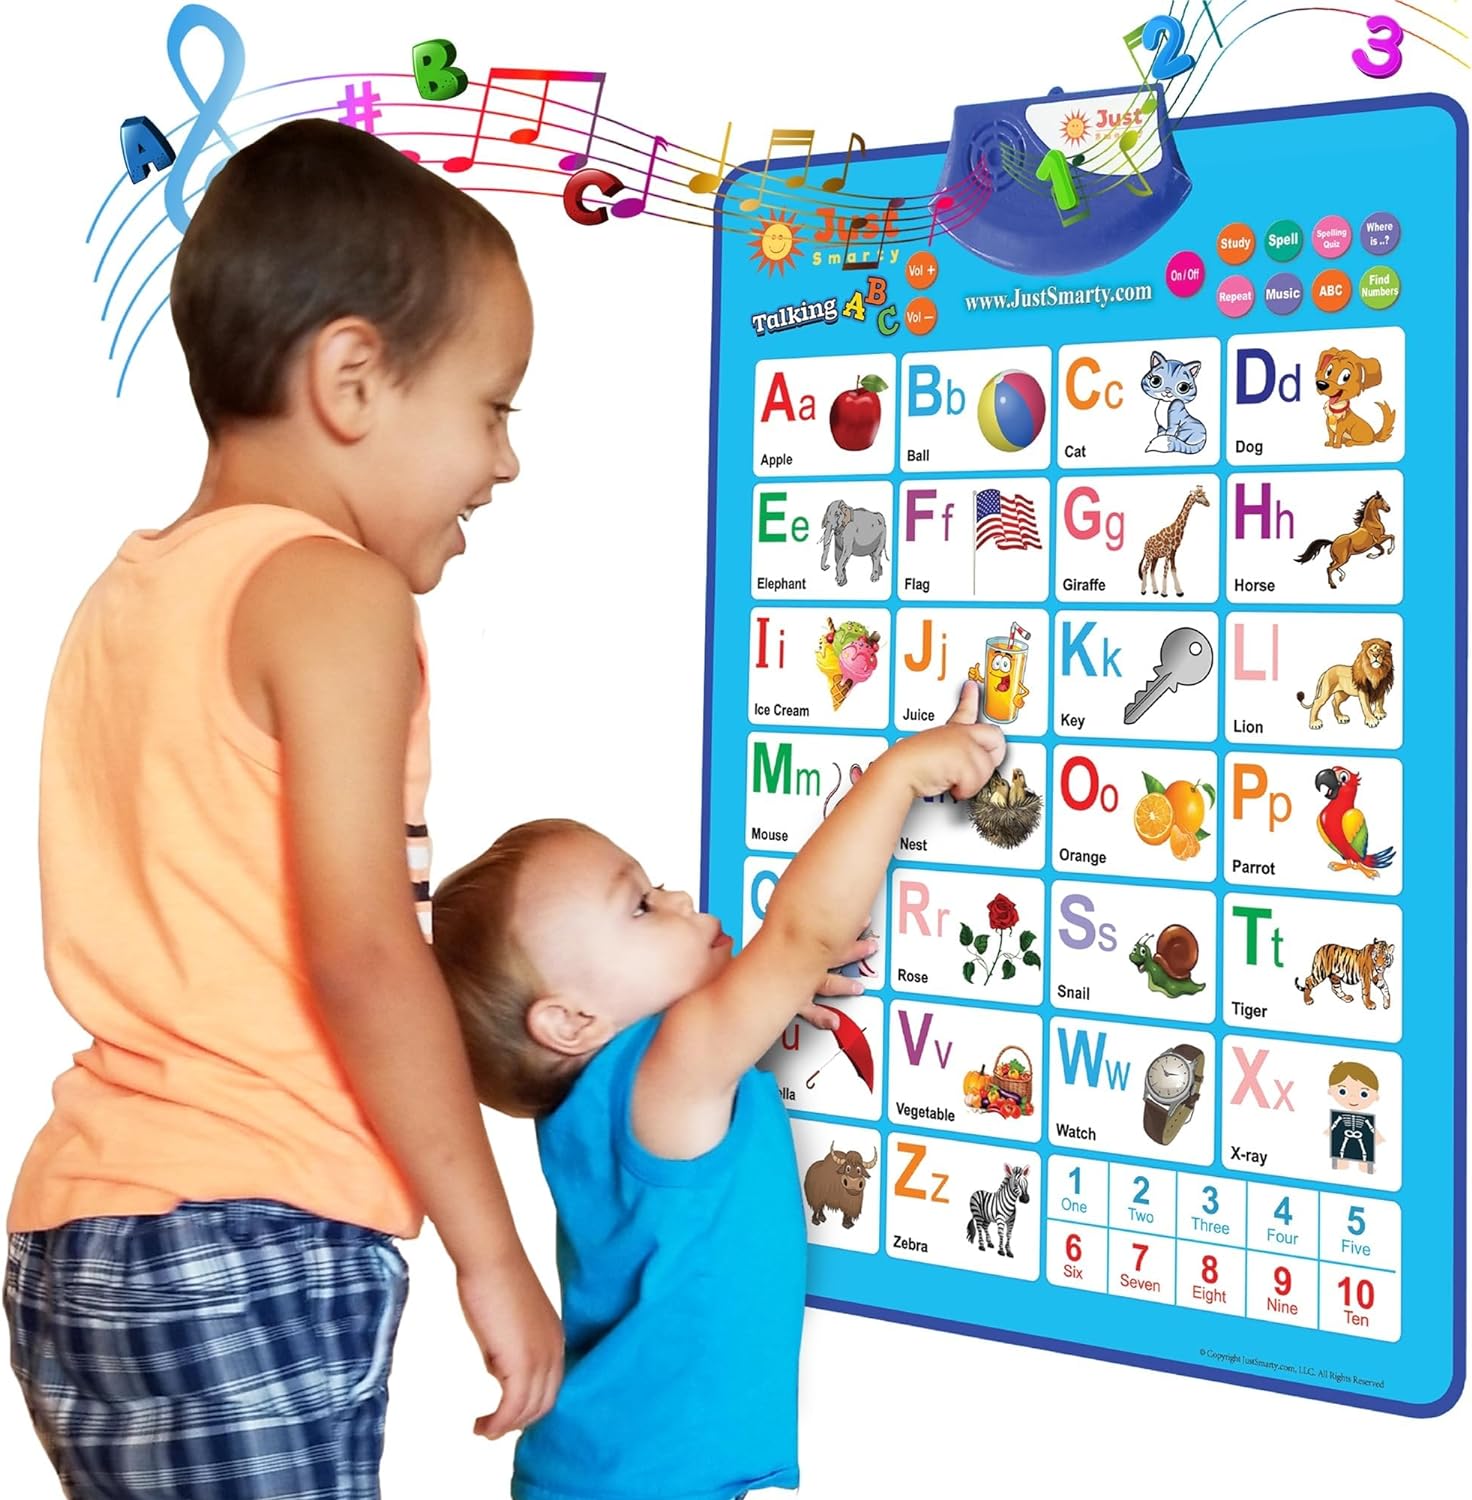 Just Smarty Alphabet Wall Chart for Toddlers 1-3 